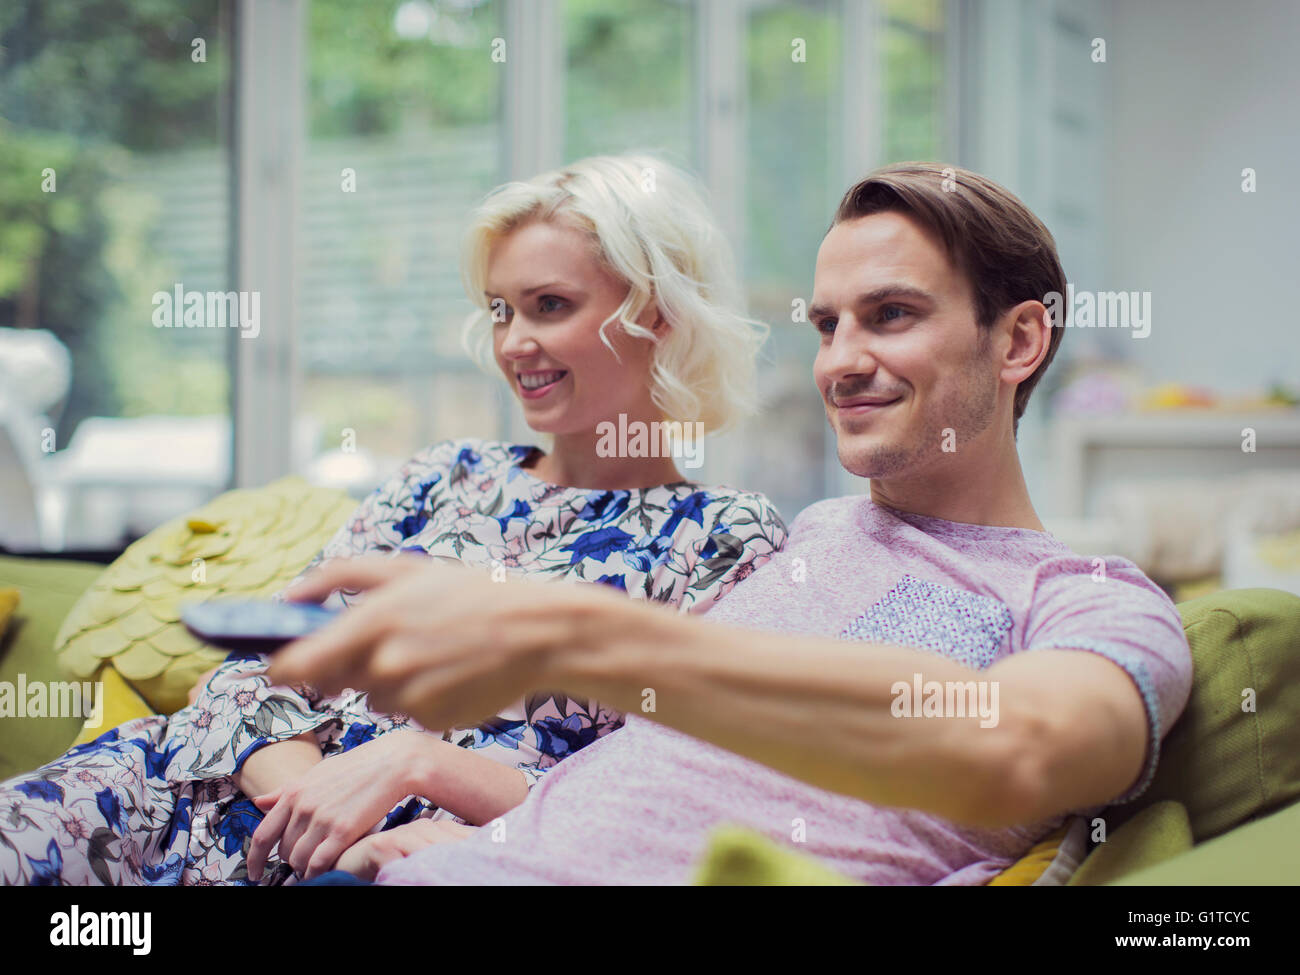 Smiling couple watching TV in living room changing channels Stock Photo